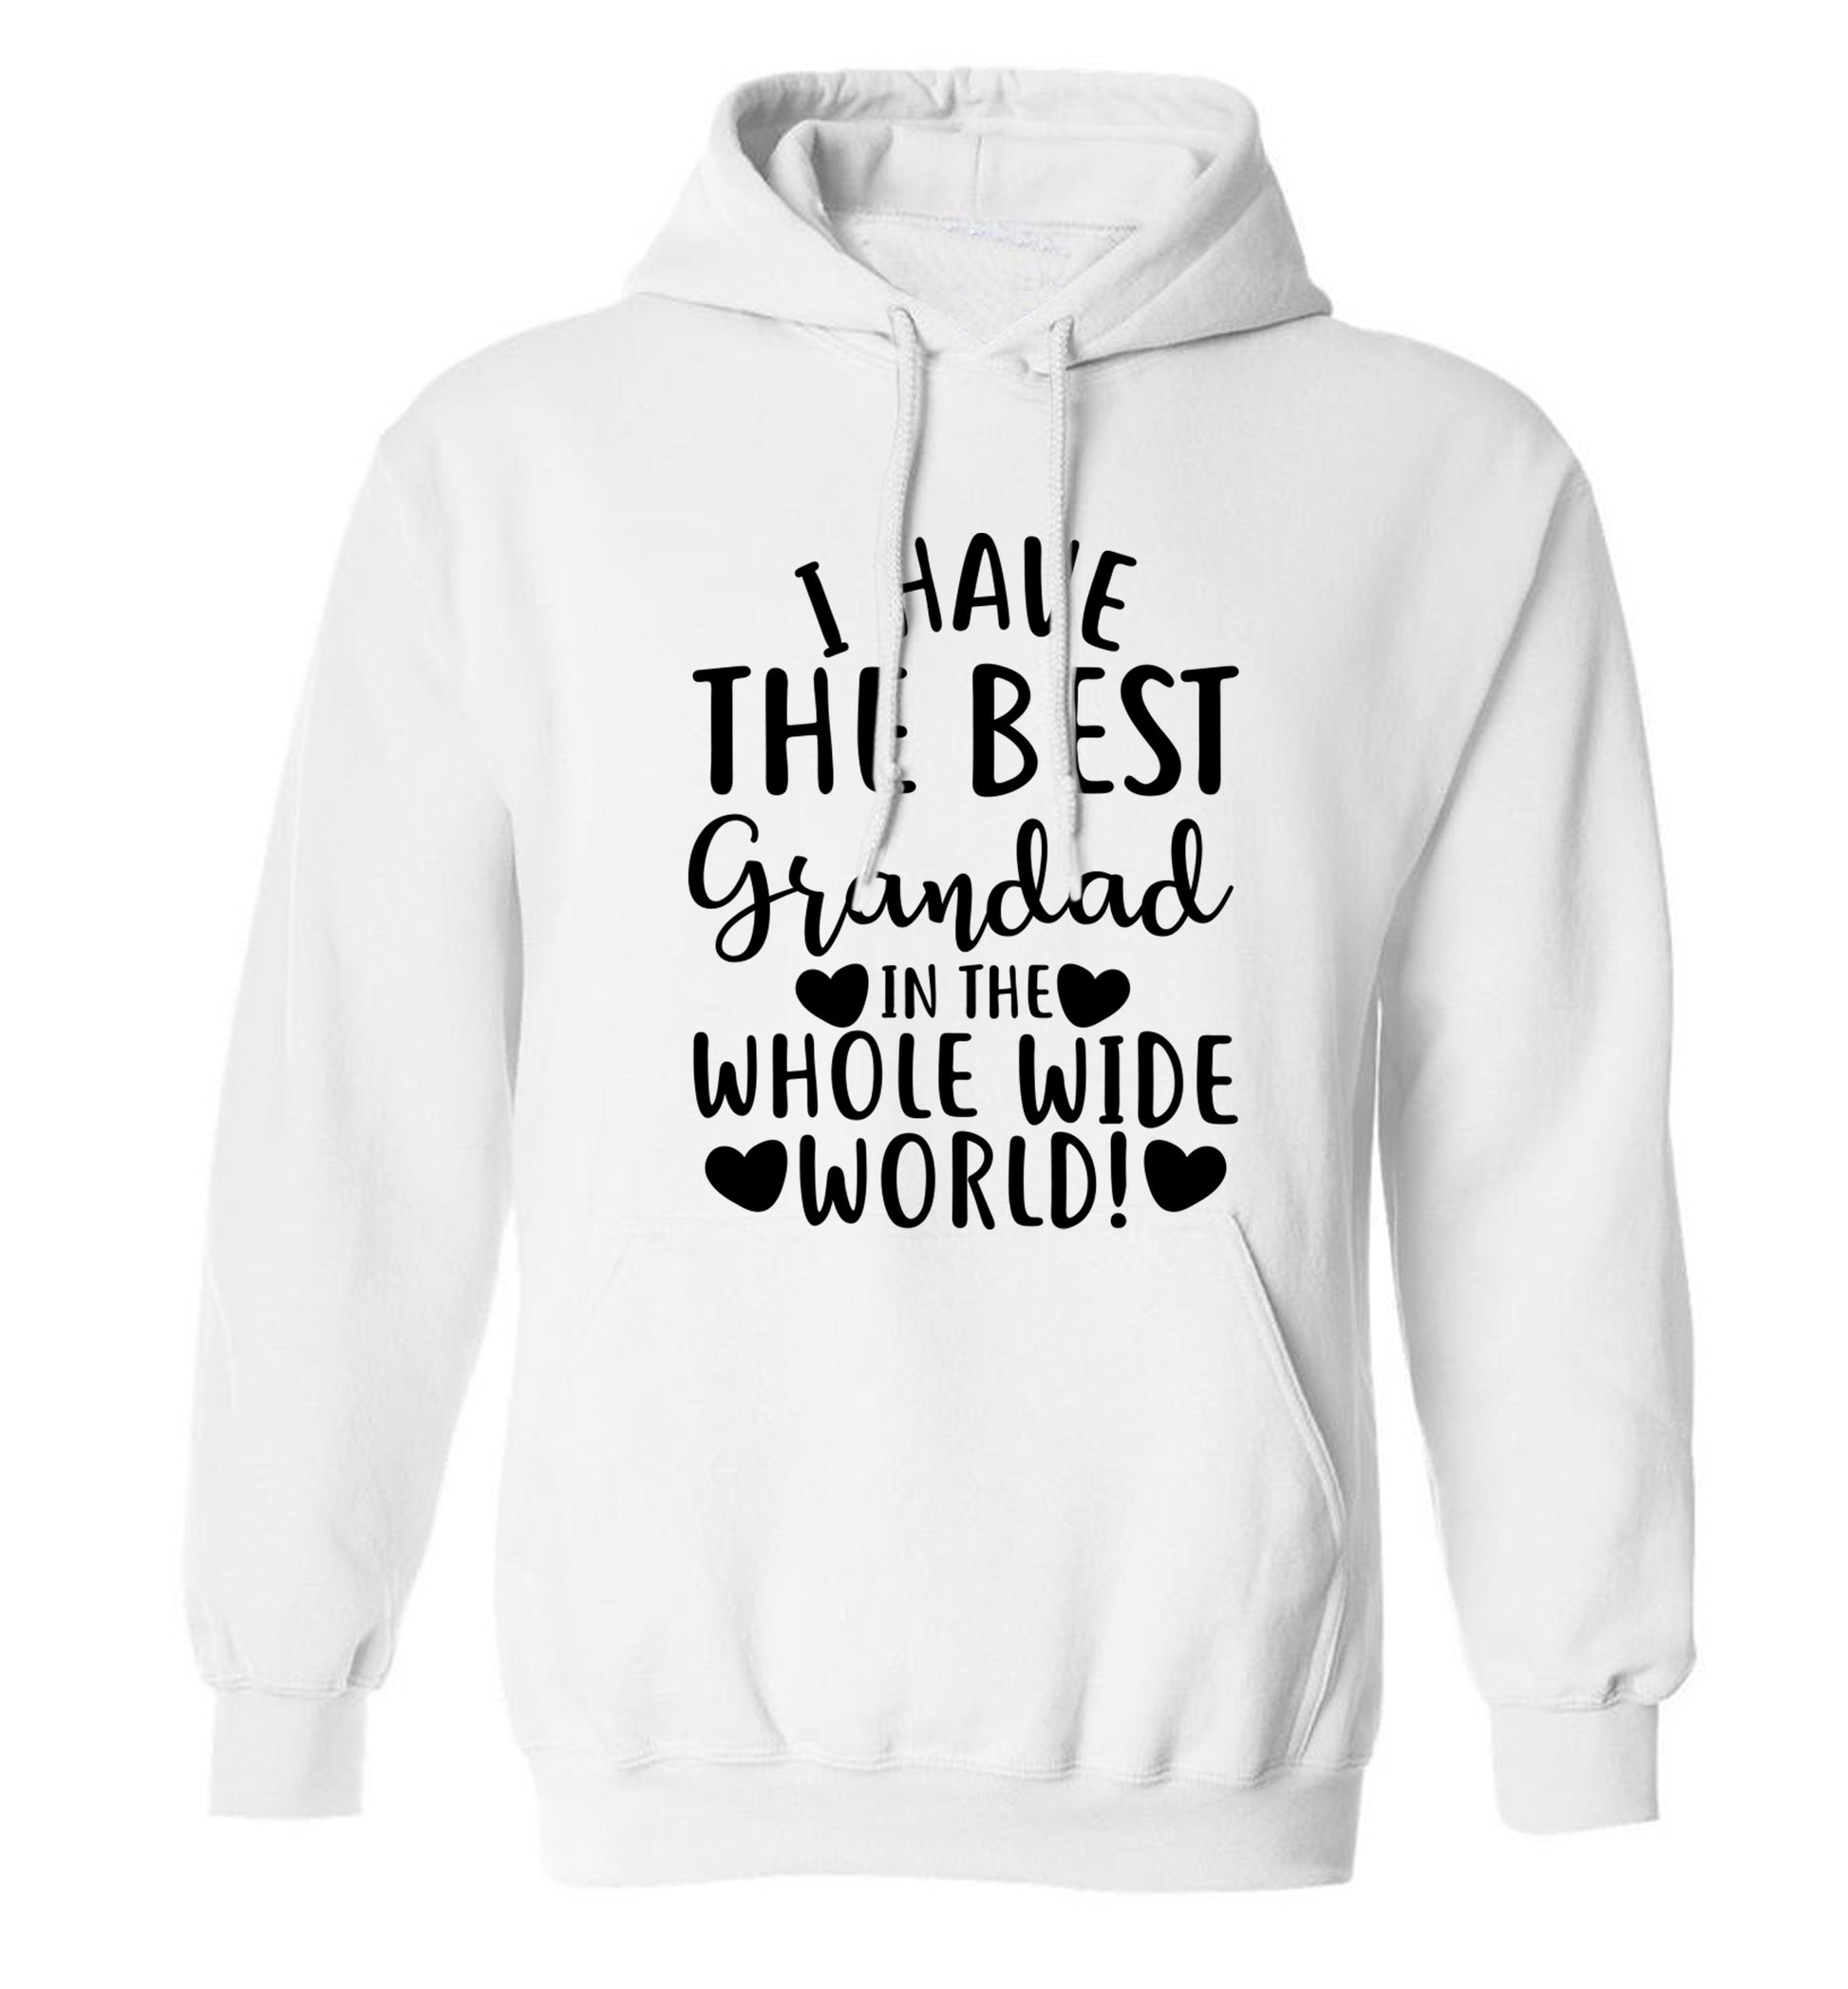 I have the best grandad in the whole wide world! adults unisex white hoodie 2XL